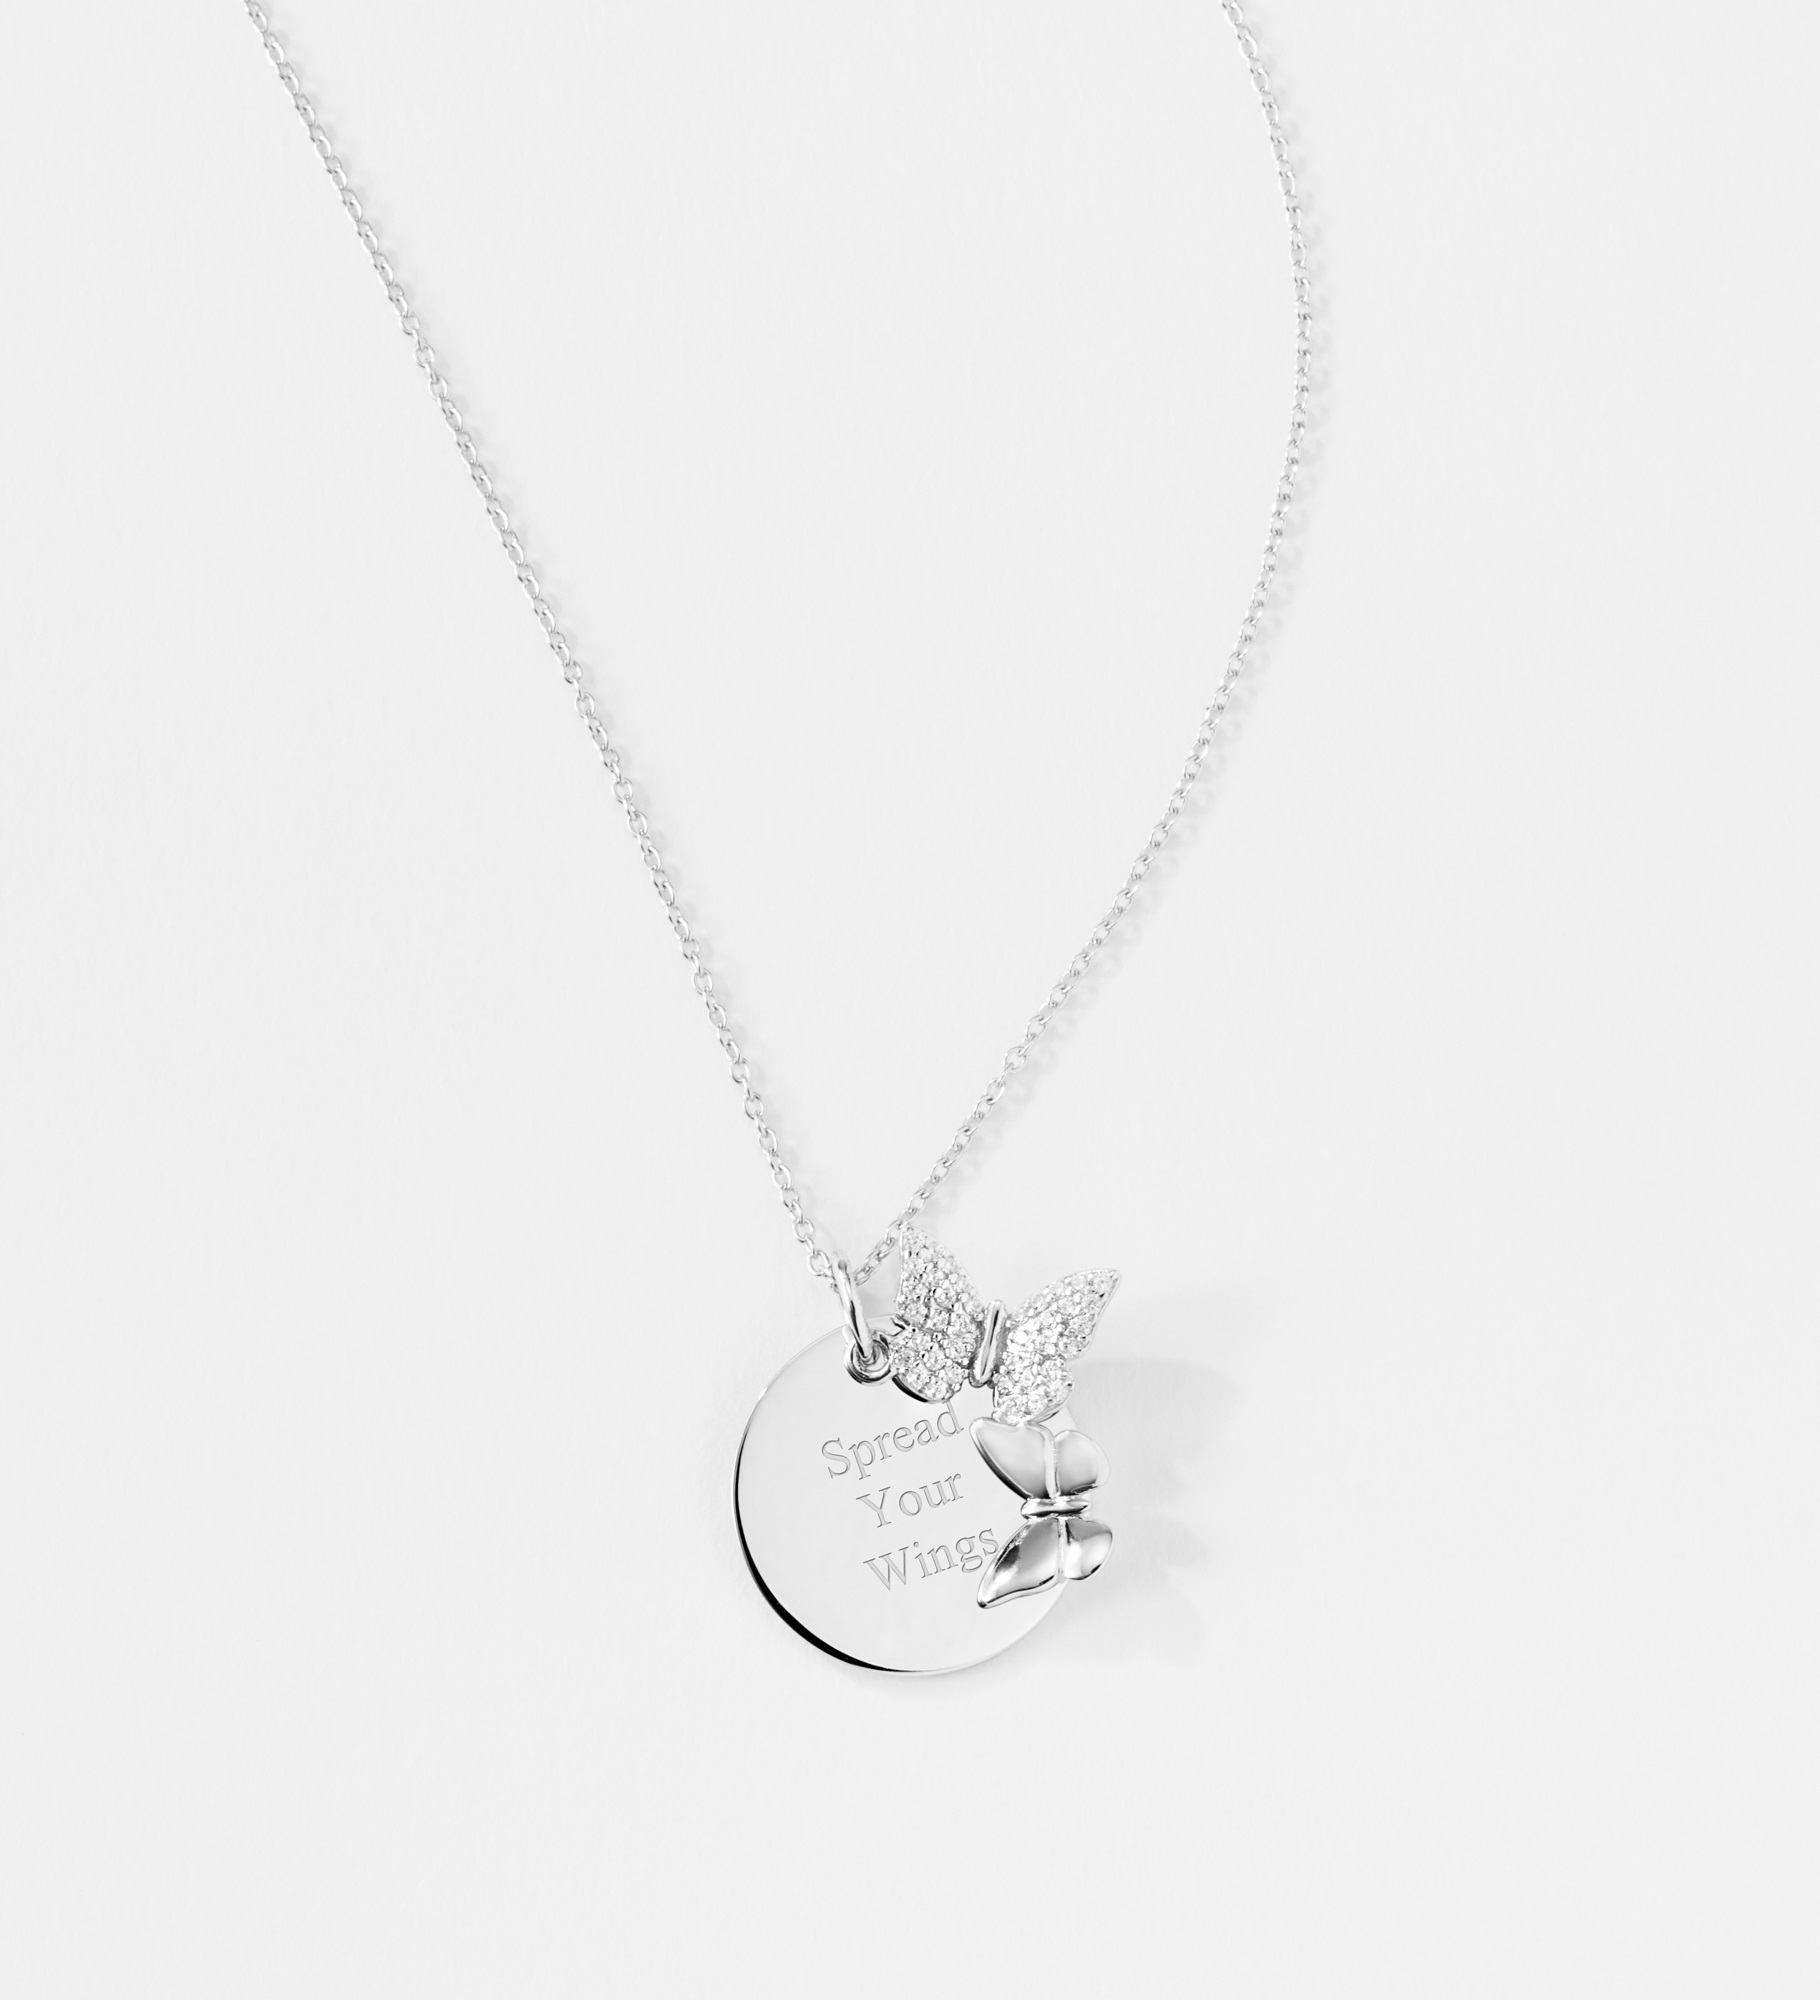  Engraved Sterling Silver Butterfly Necklace